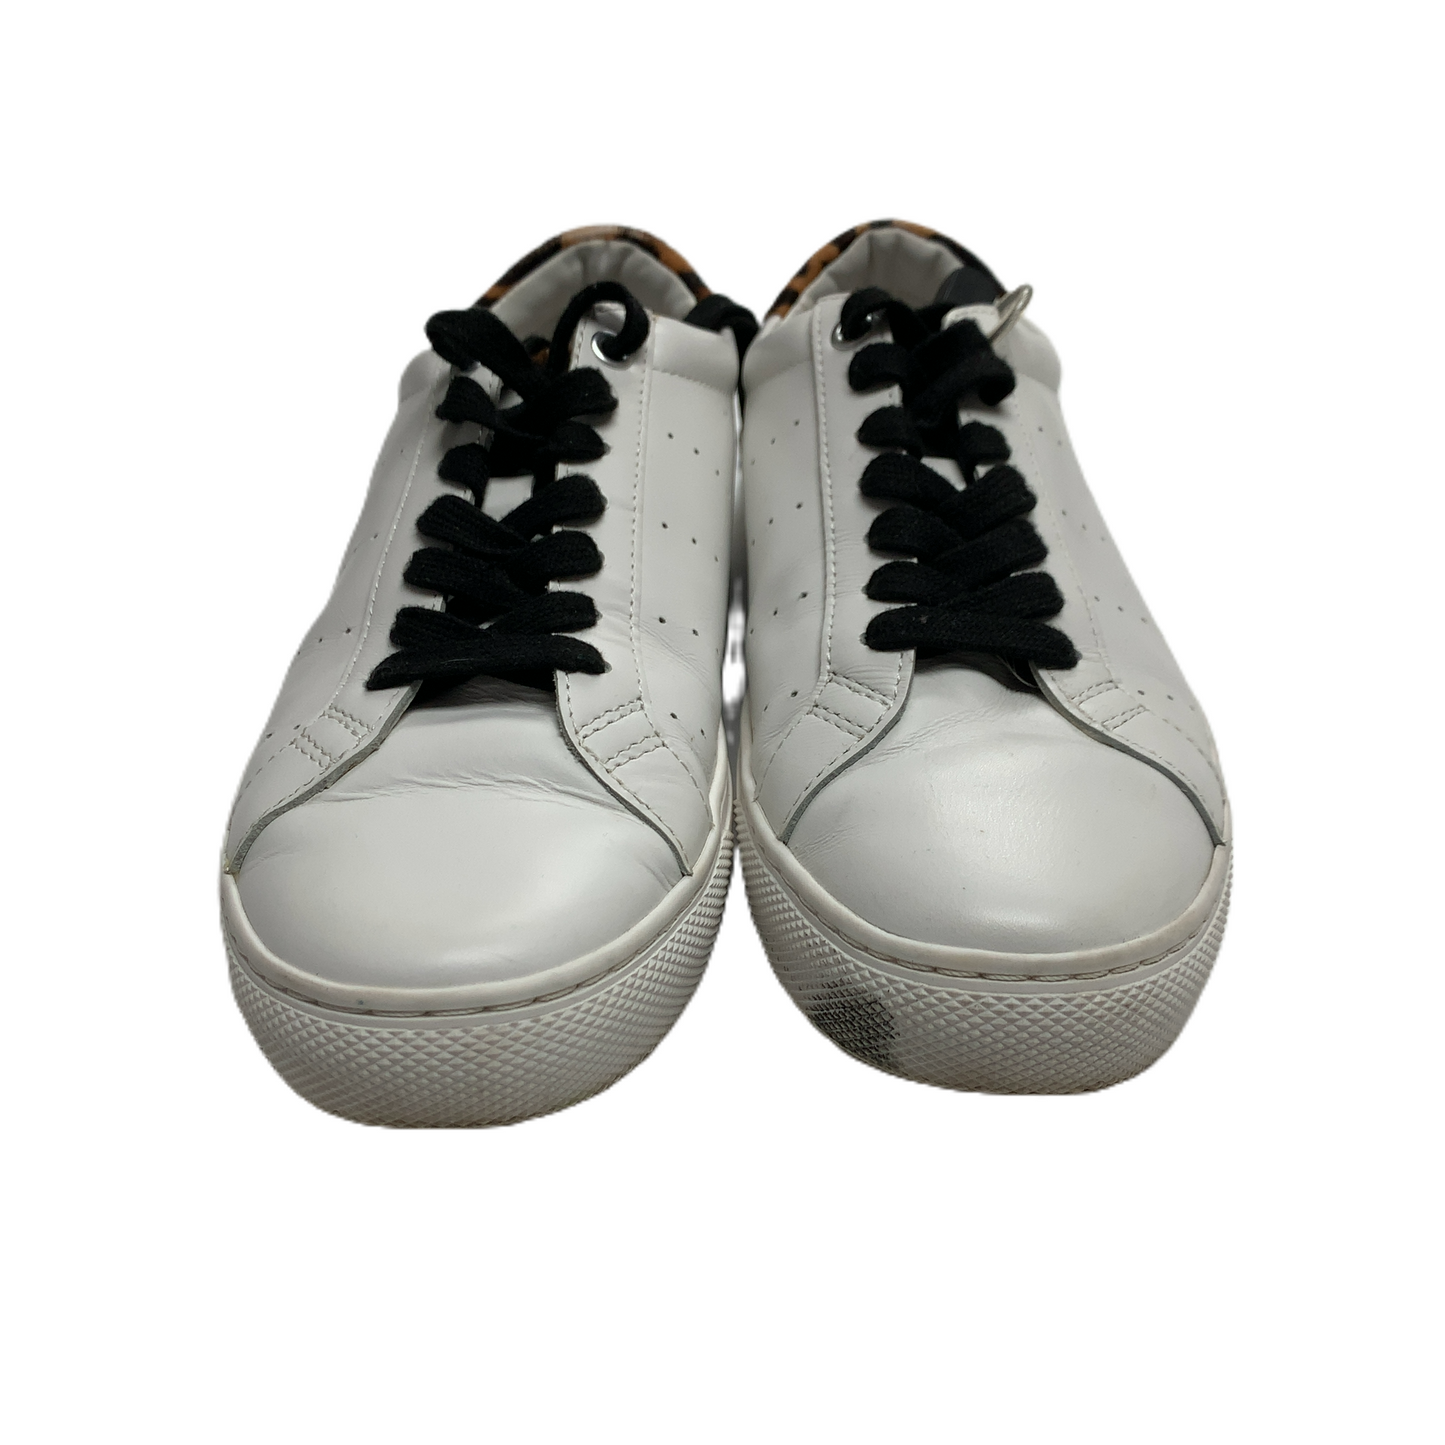 Shoes Sneakers By J Crew  Size: 8